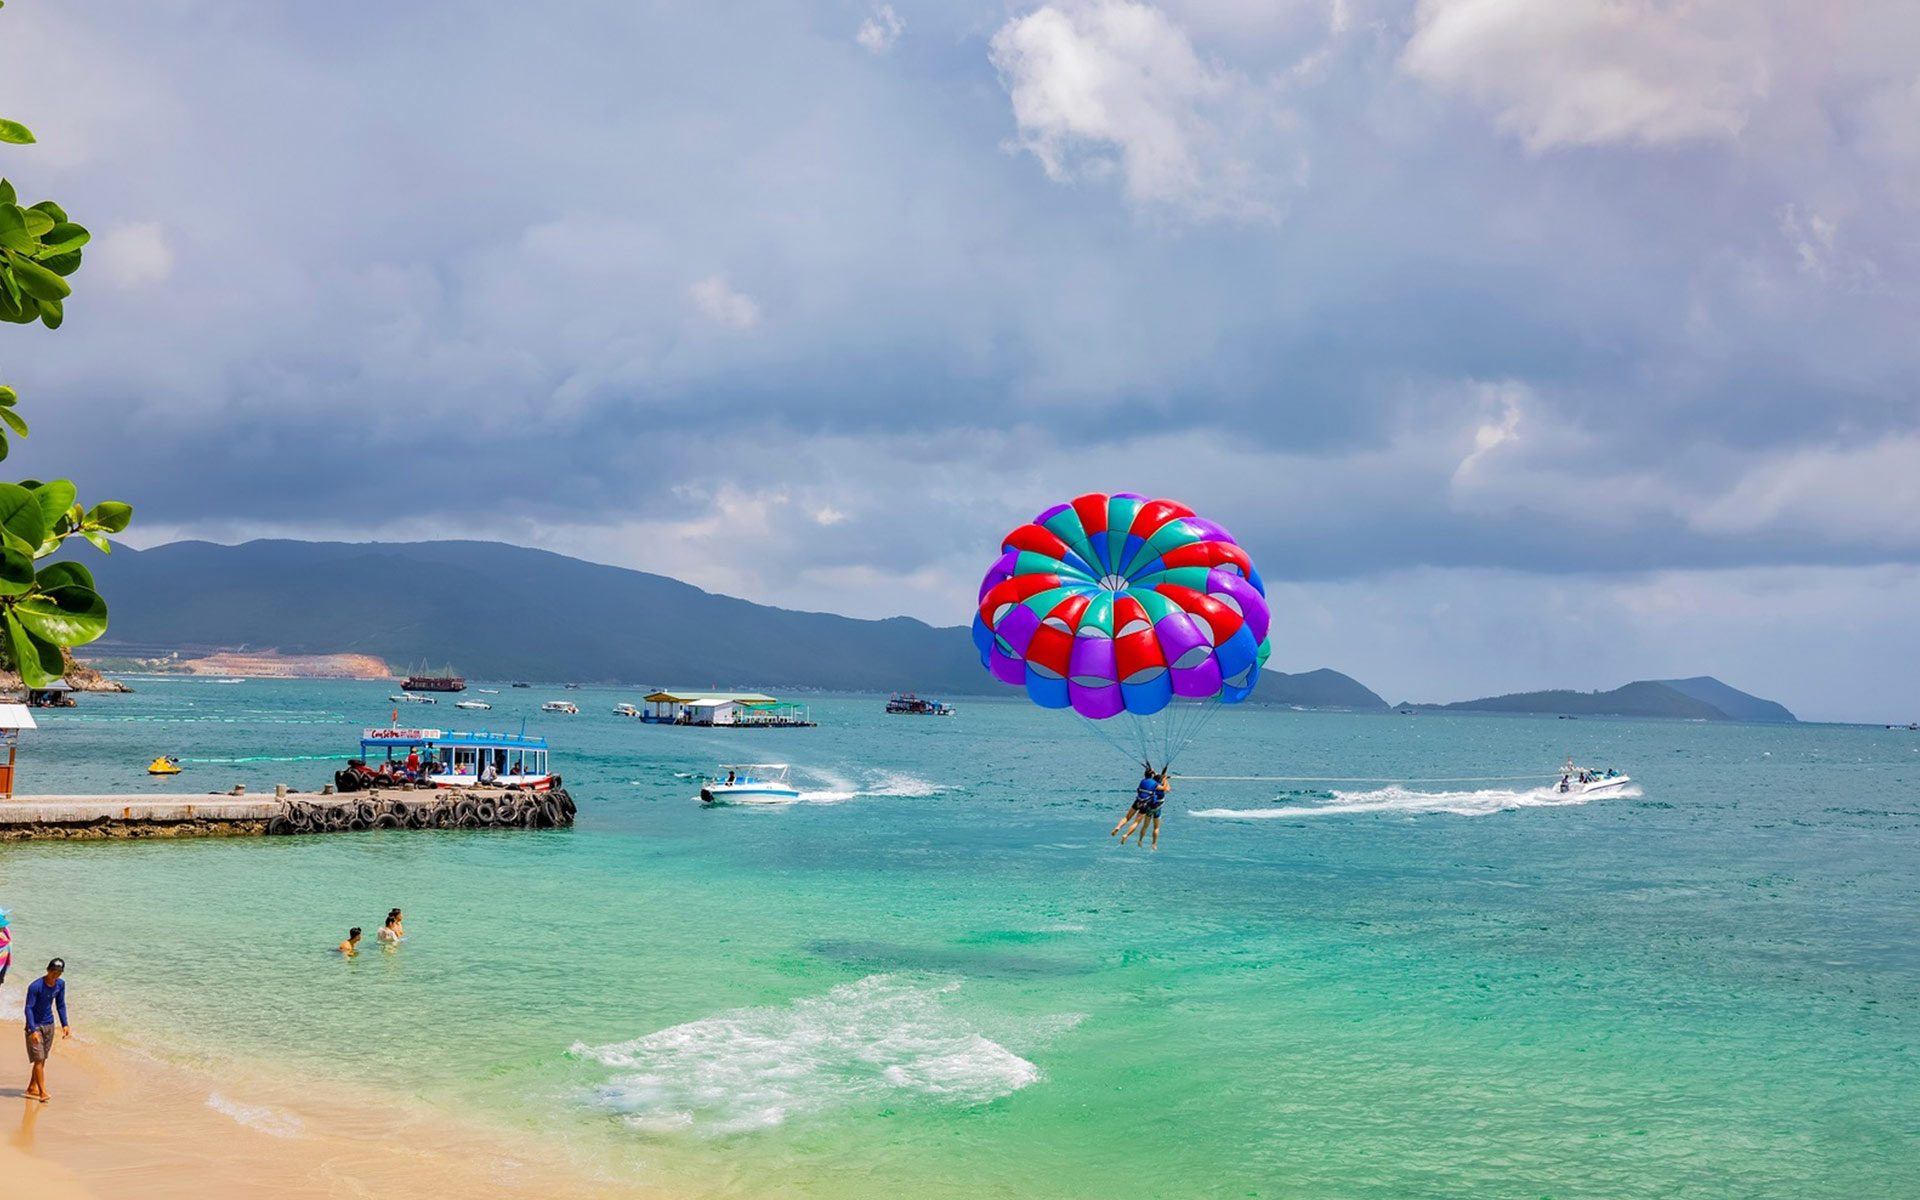 Tourist enjoy parasailing in one of the most beautiful beaches in Nha Trang.